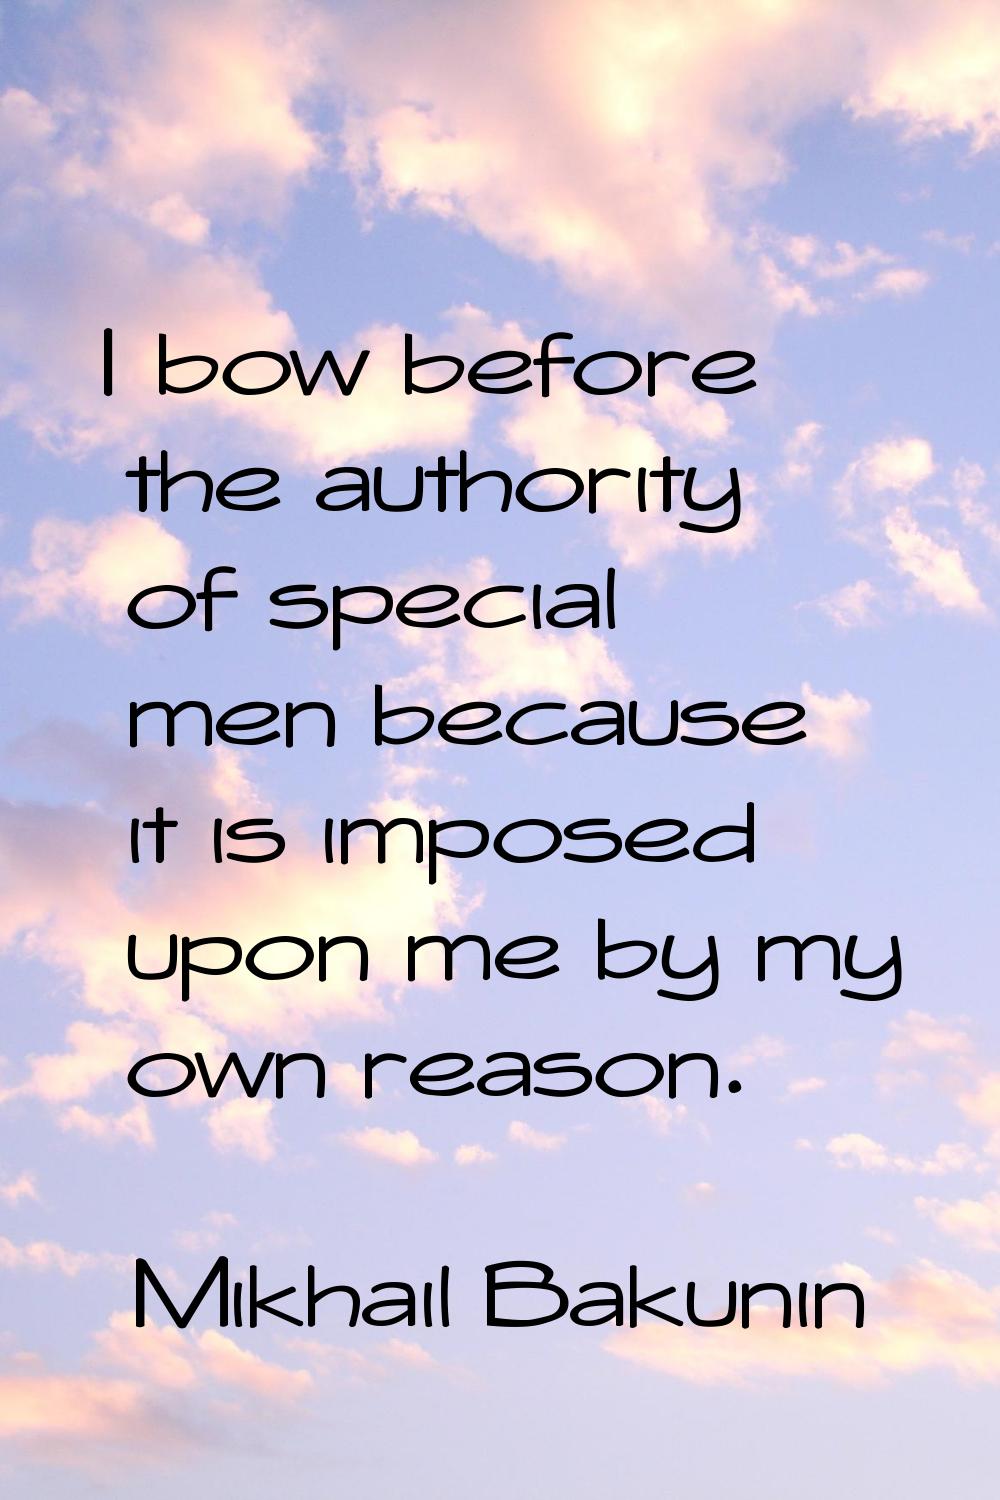 I bow before the authority of special men because it is imposed upon me by my own reason.